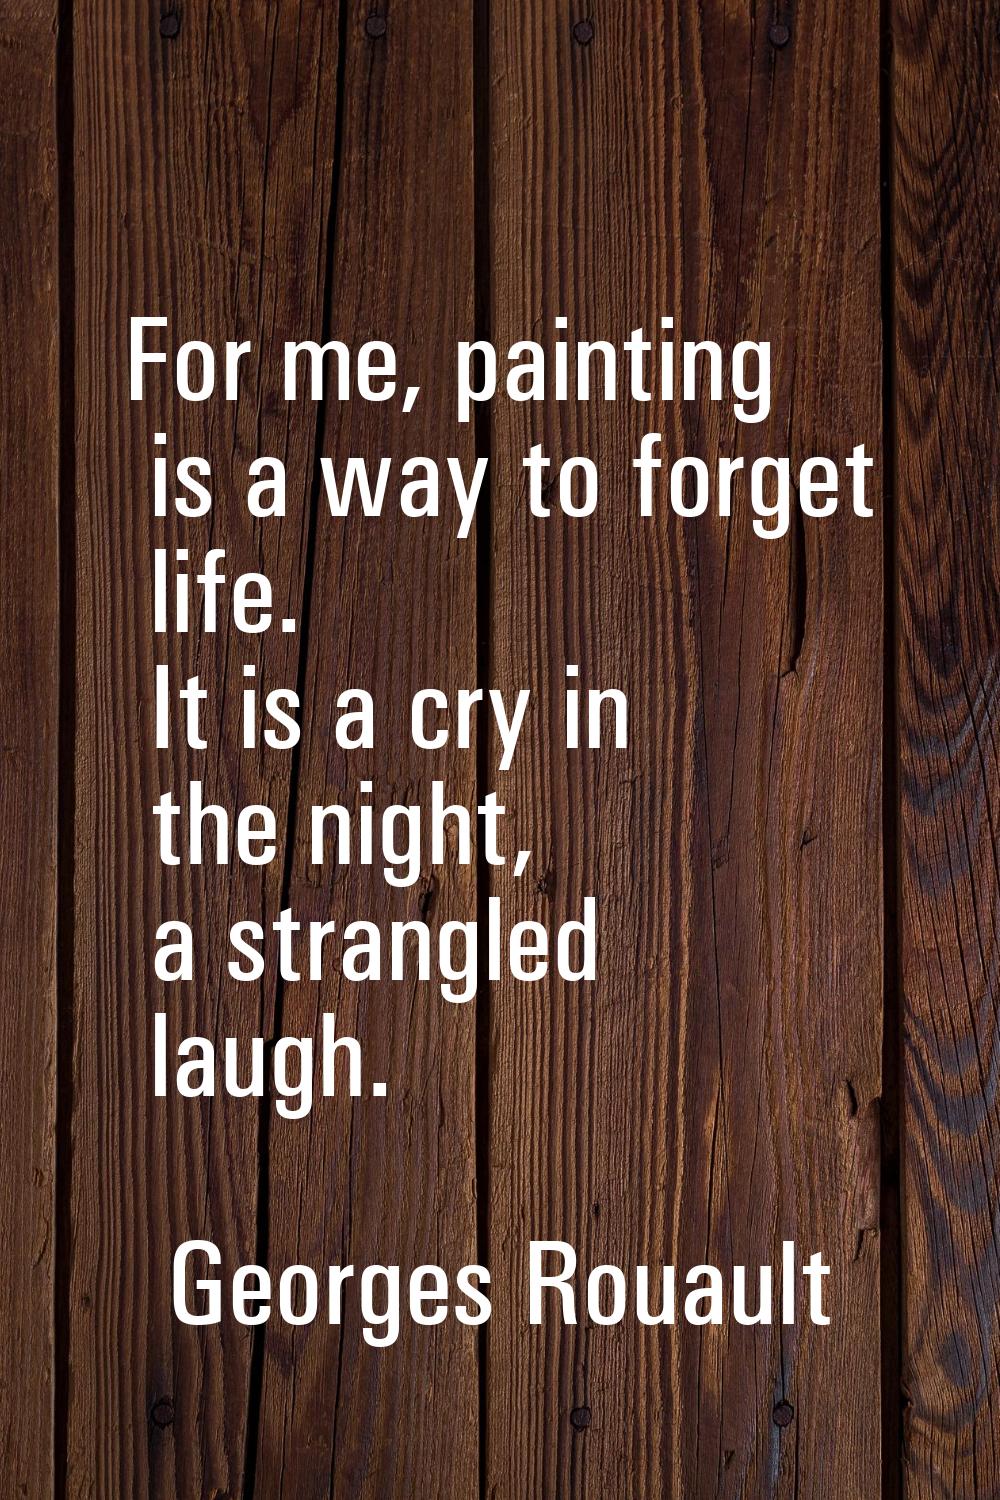 For me, painting is a way to forget life. It is a cry in the night, a strangled laugh.